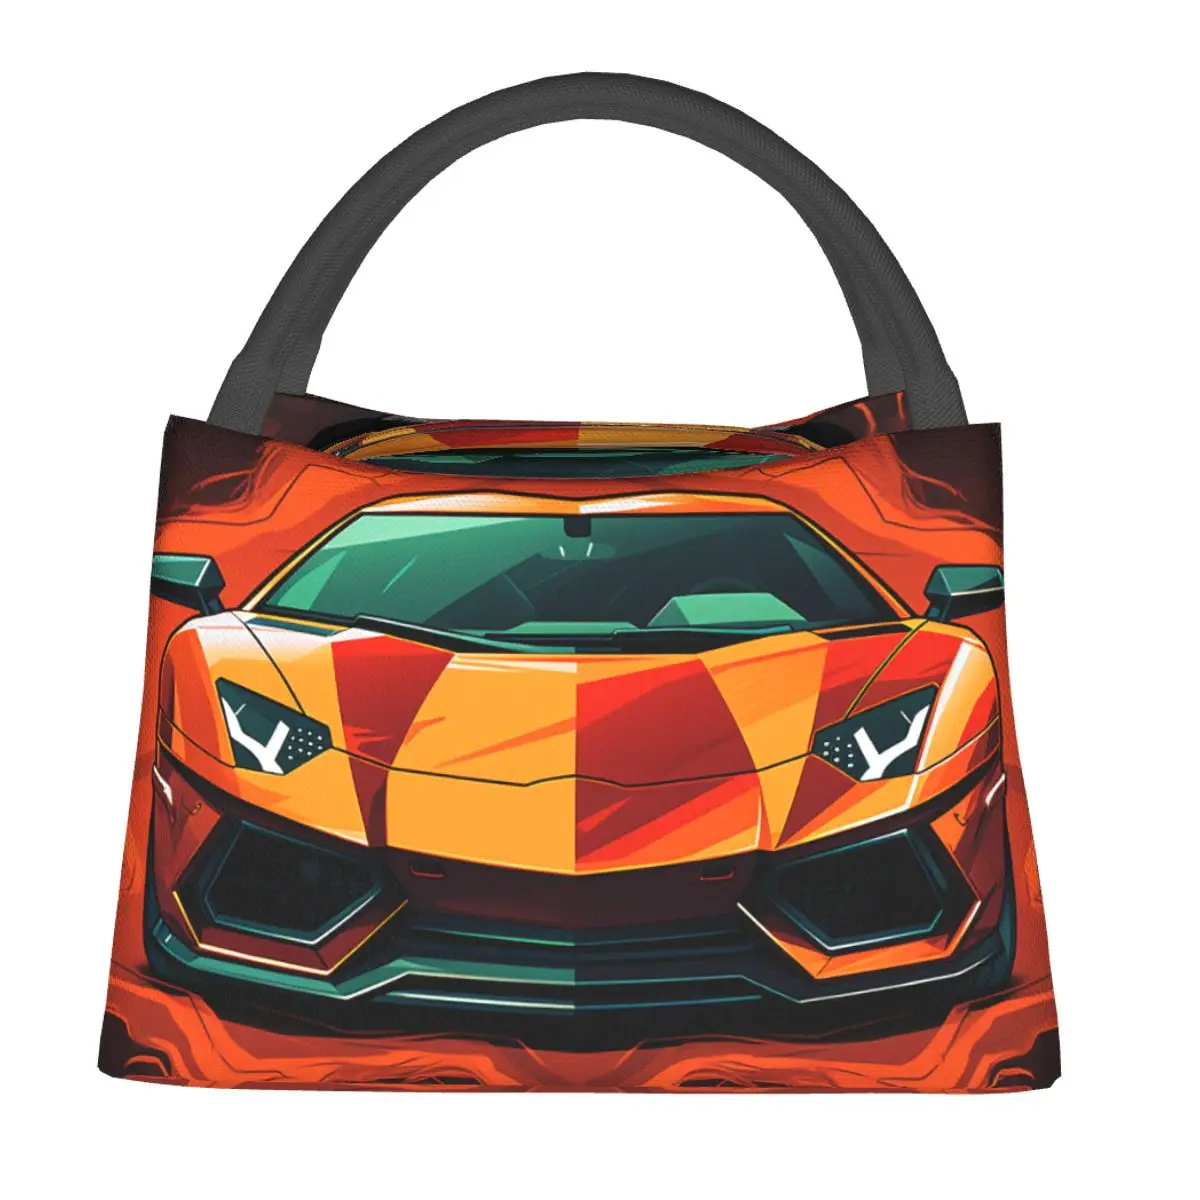 

Luxury Sports Car Lunch Bag For Child Vibrant Tones Vintage Print Lunch Box School Cooler Bag Portable Oxford Thermal Lunch Bags